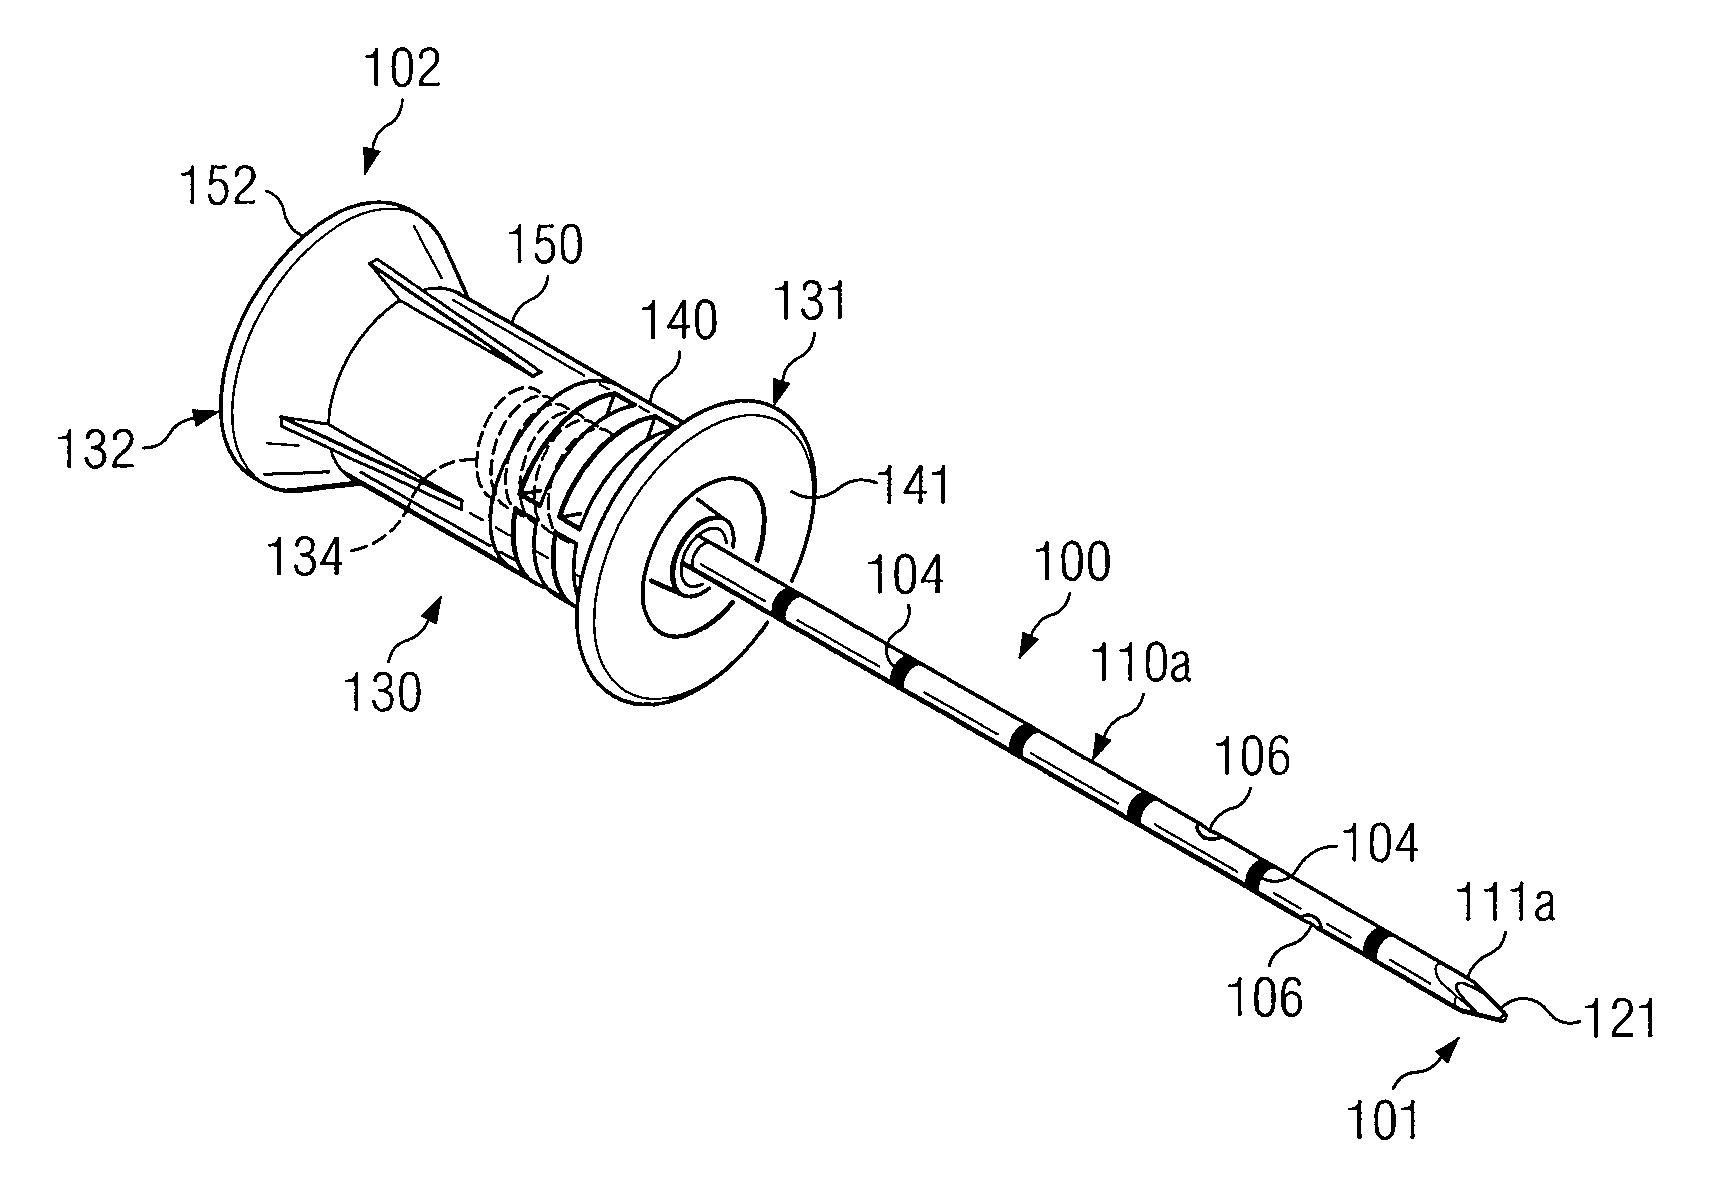 Bone marrow aspiration devices and related methods